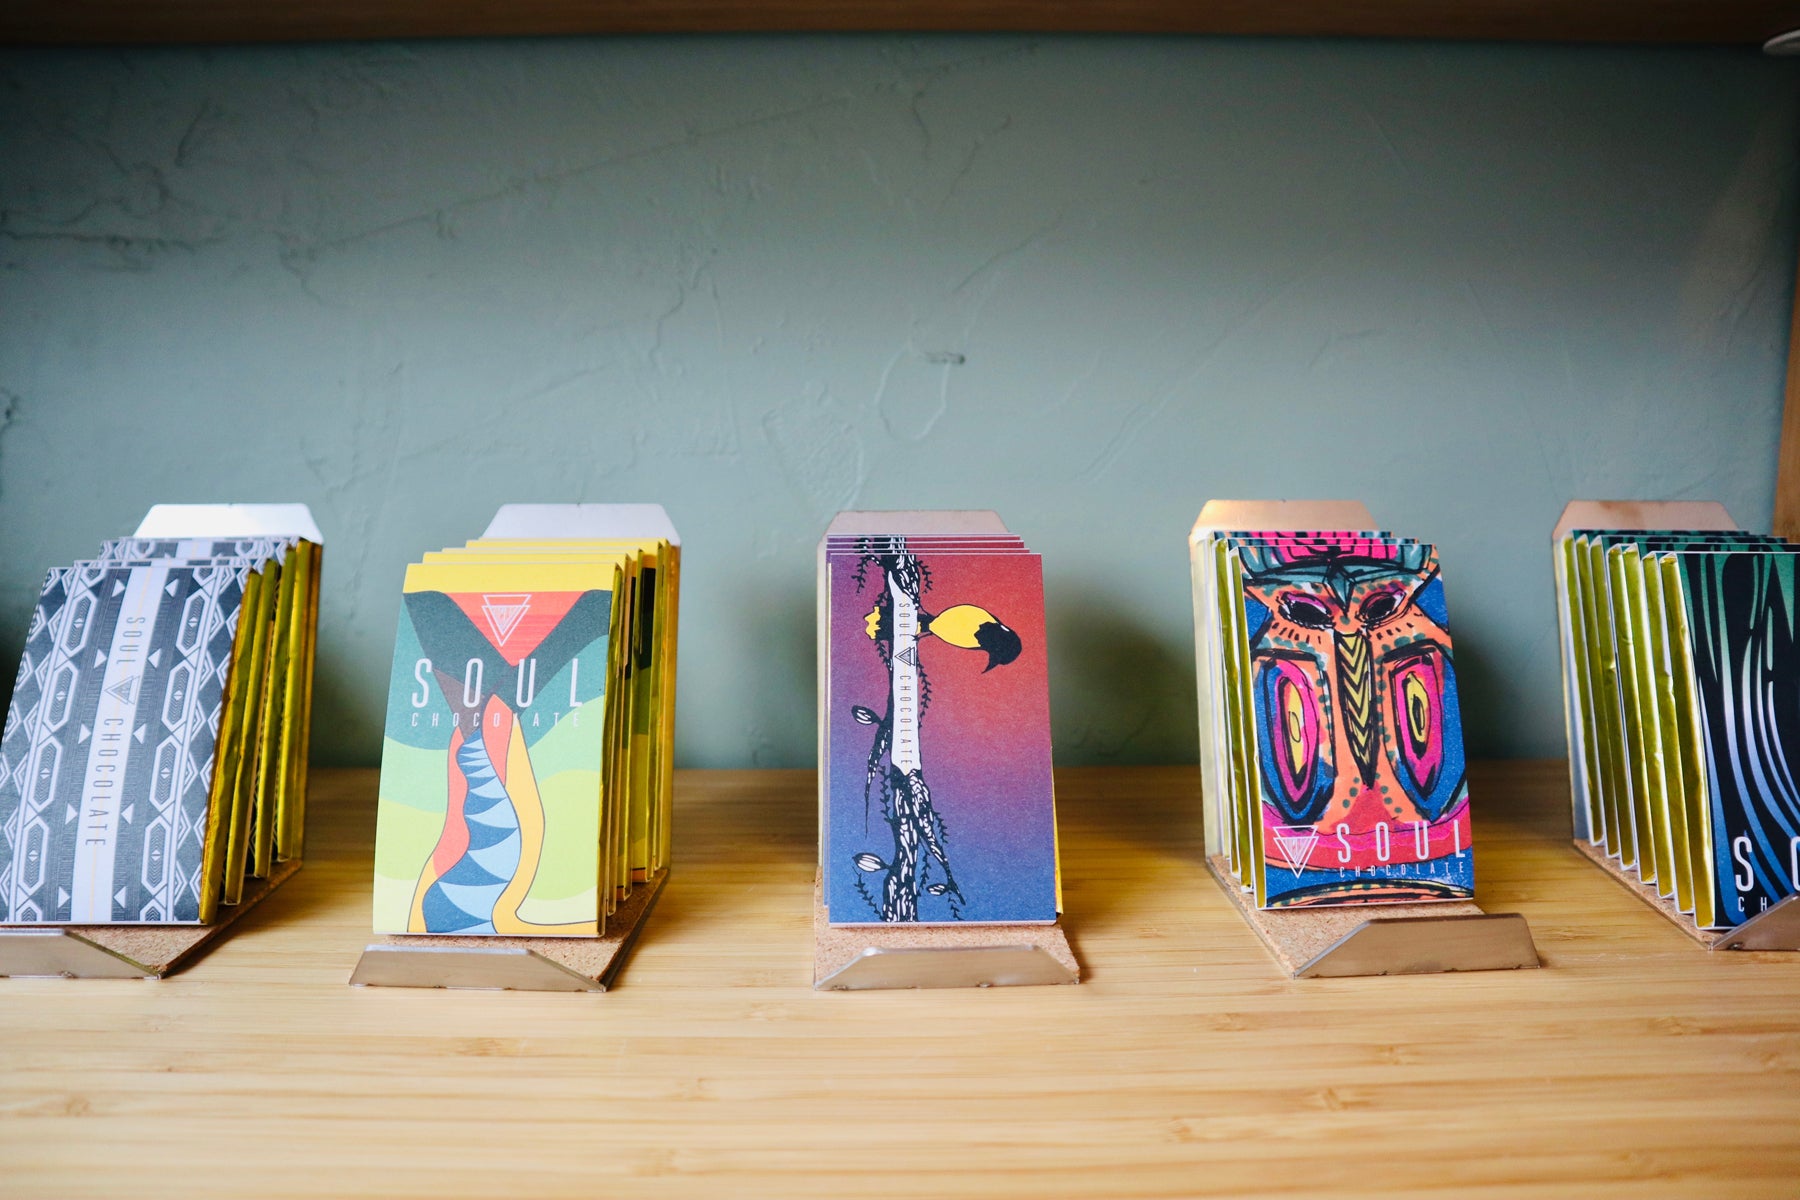 An array of chocolate bars made by Soul Roasters sit on display on a wooden shelf within their retail location. 